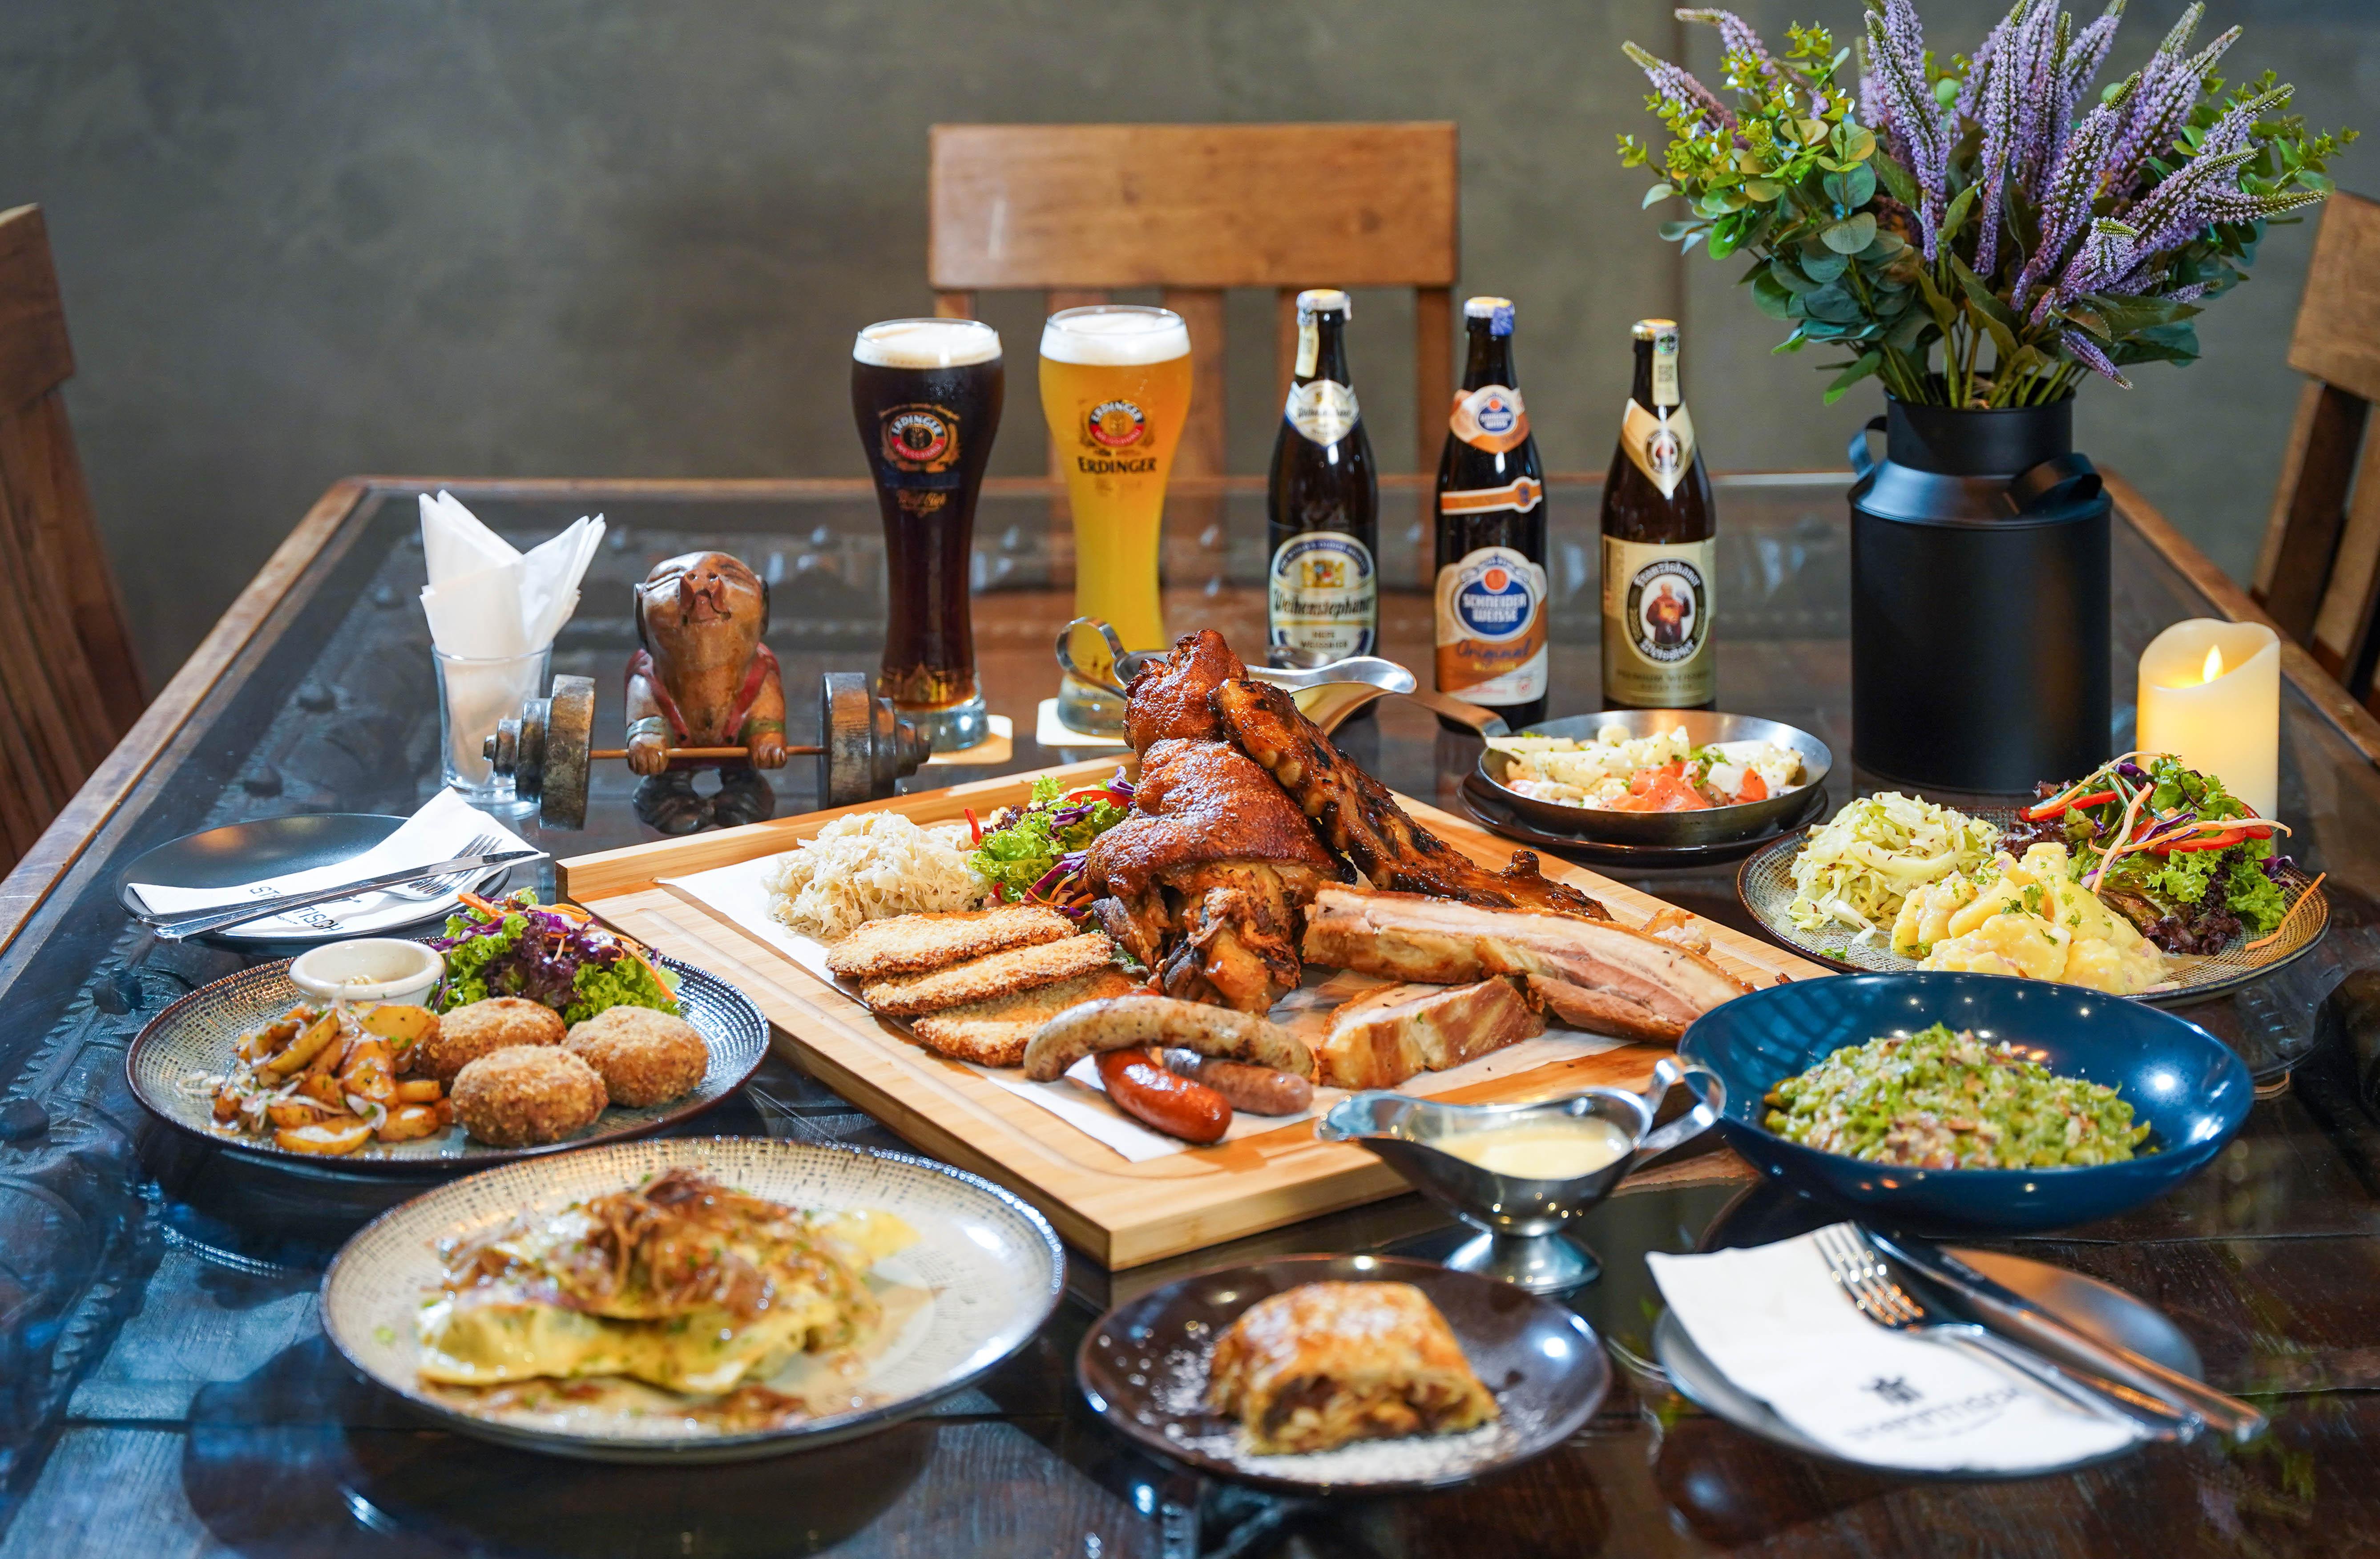 stammtisch brings a german tavern's time-honoured temptations to lalaport bukit bintang city centre